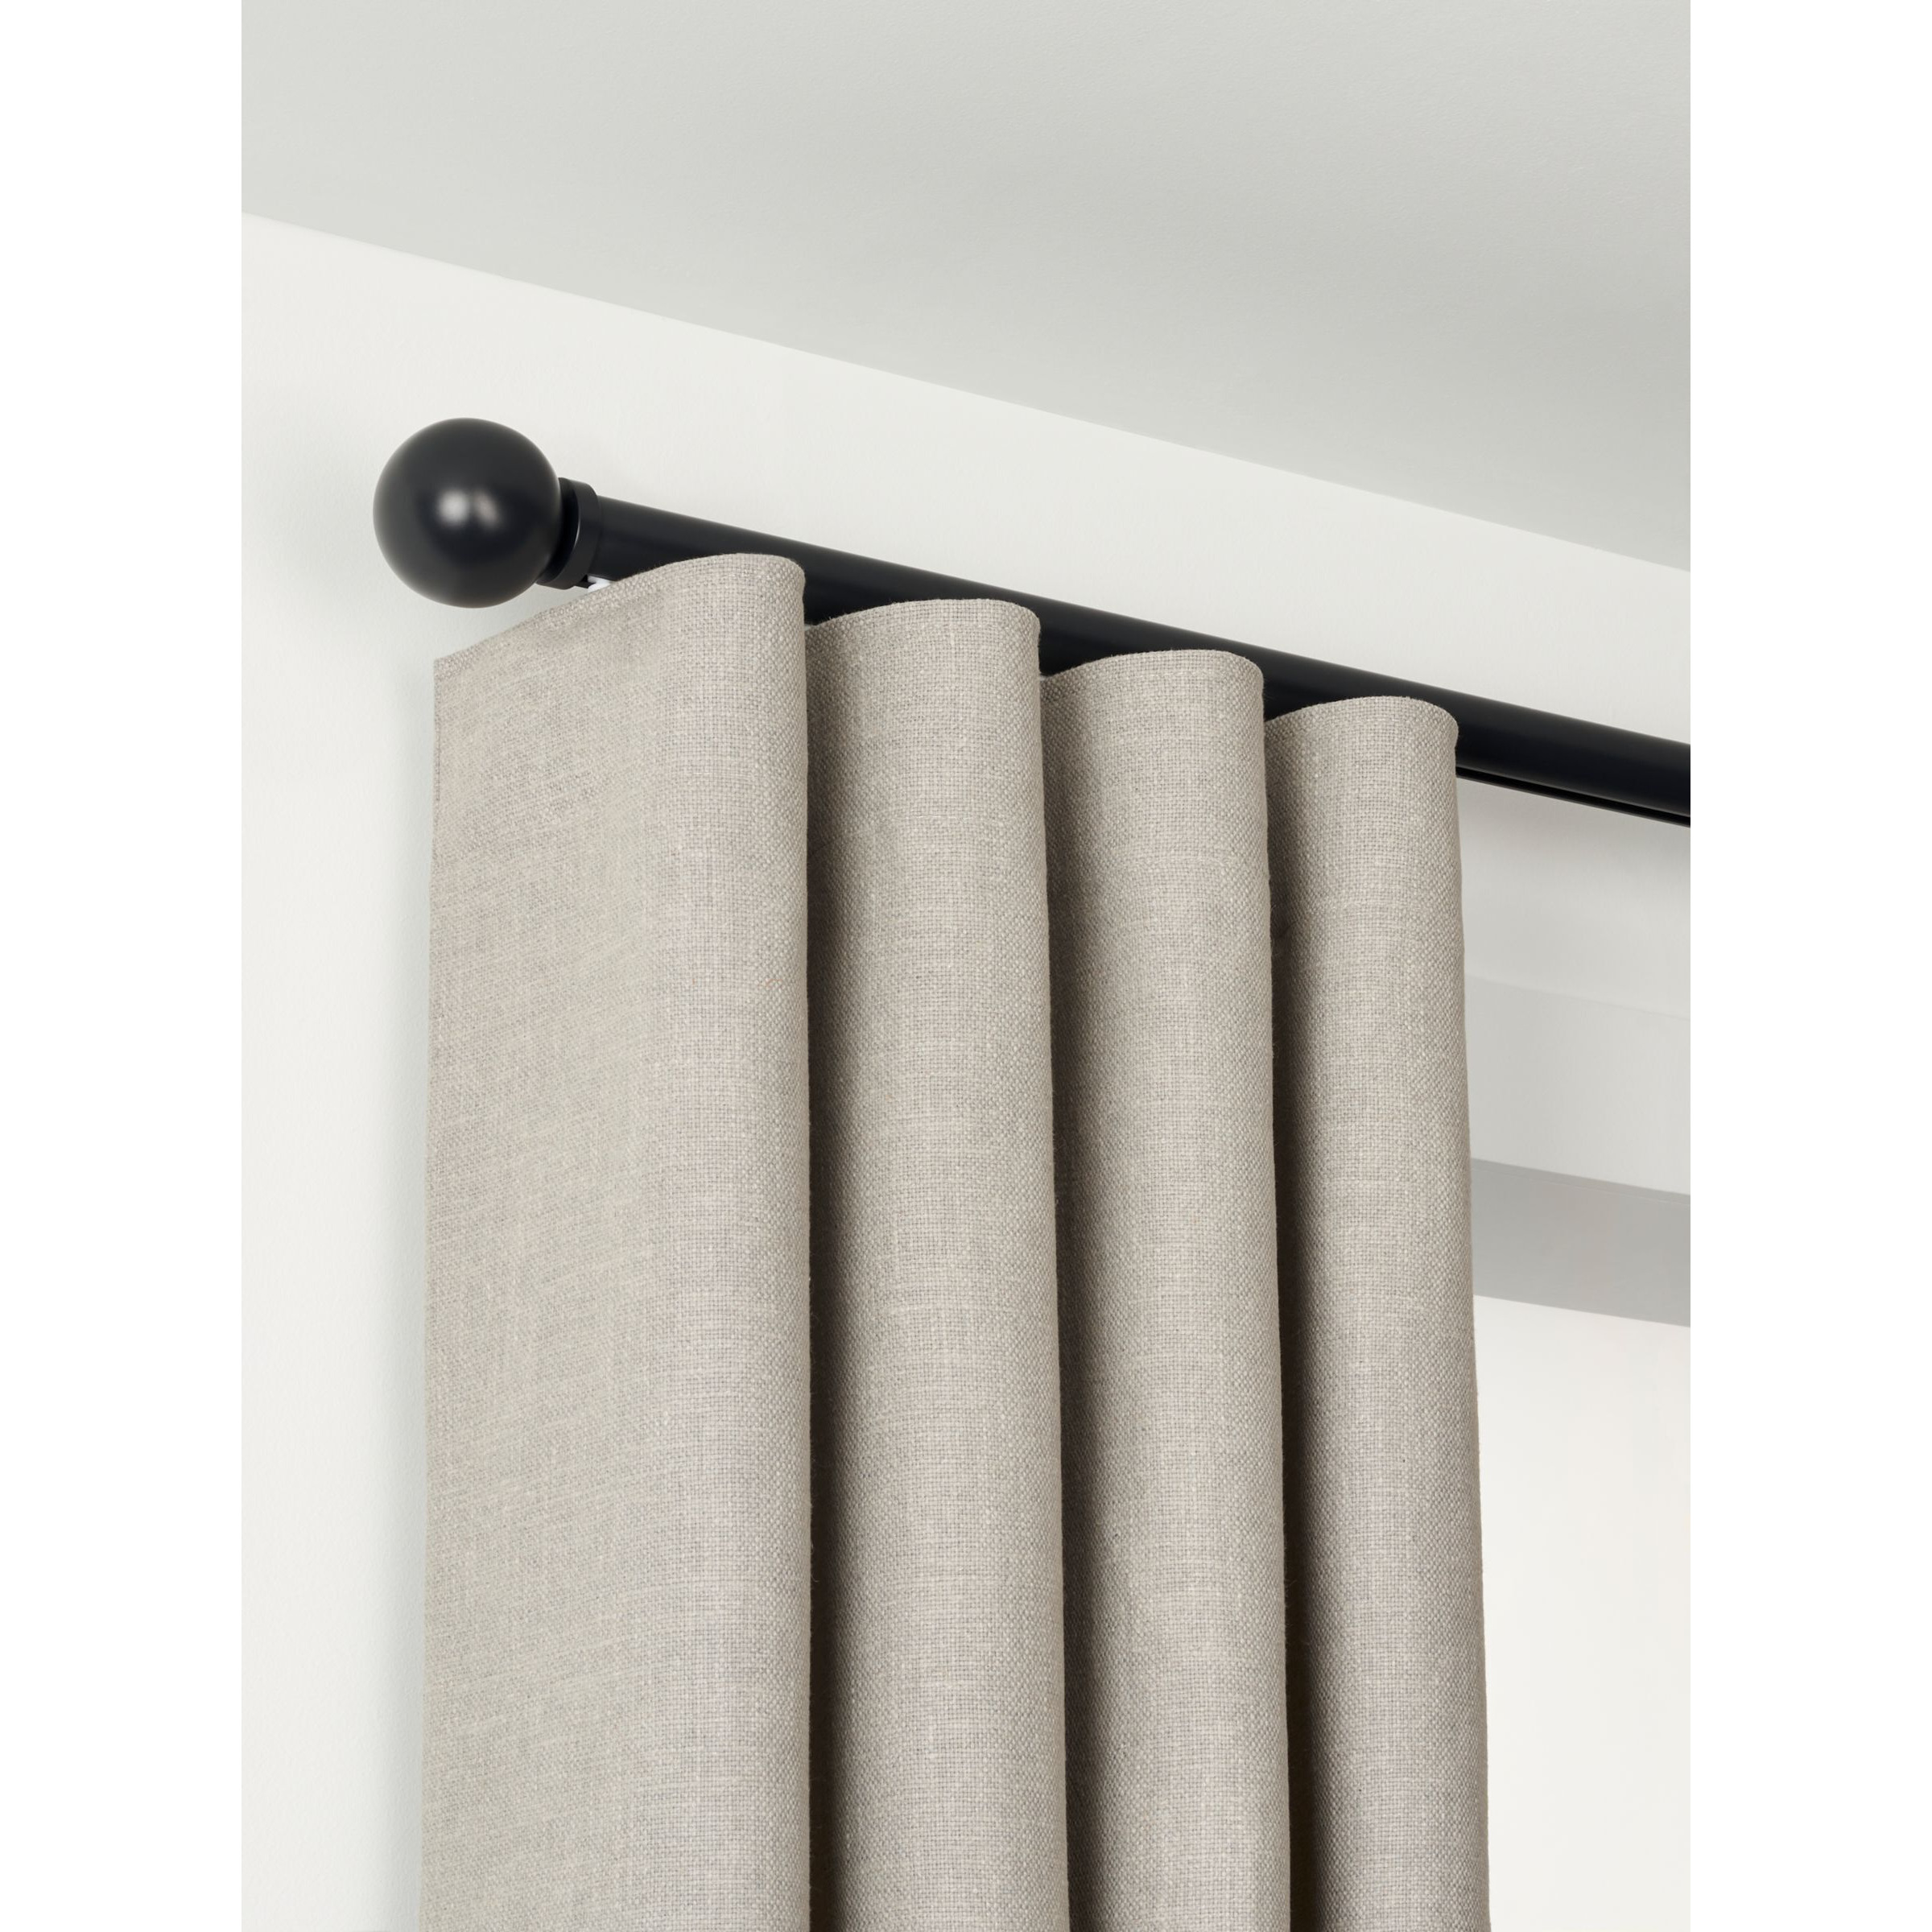 John Lewis Select Curl Gliding Curtain Pole with Ball Finial, Wall Fix, Dia.30mm - image 1